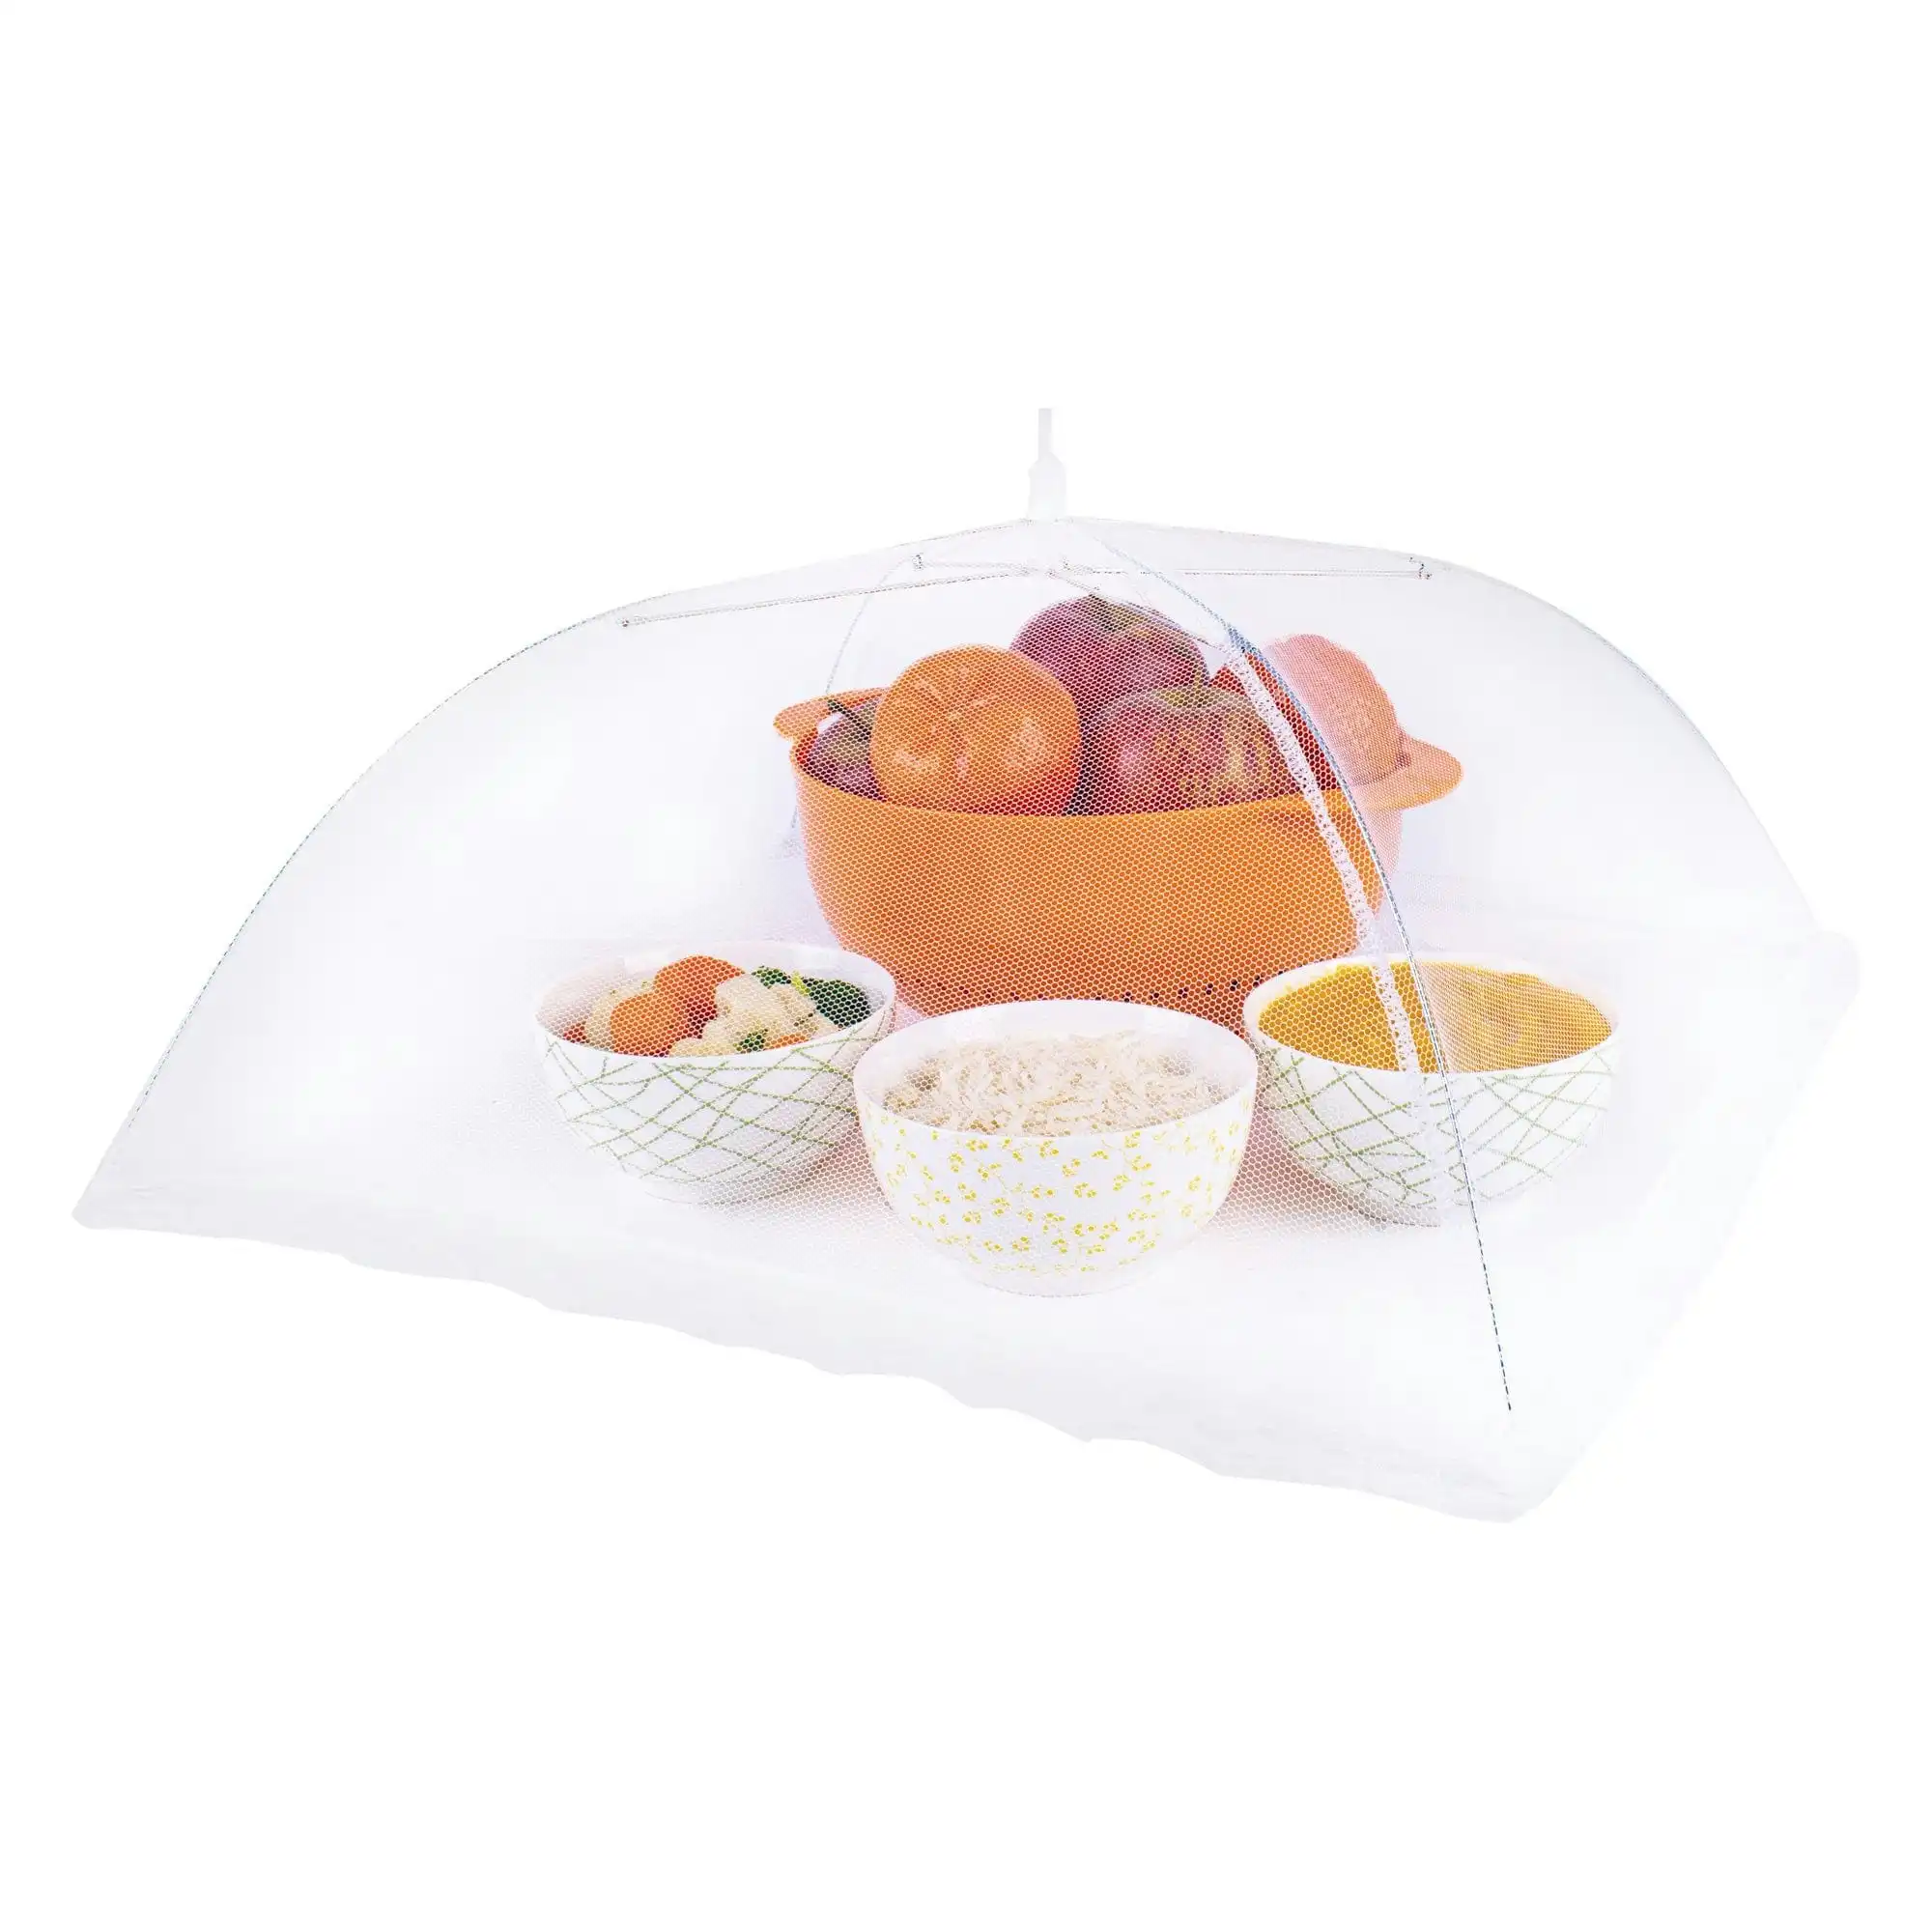 33cm Square Pop-up Mesh Food Cover